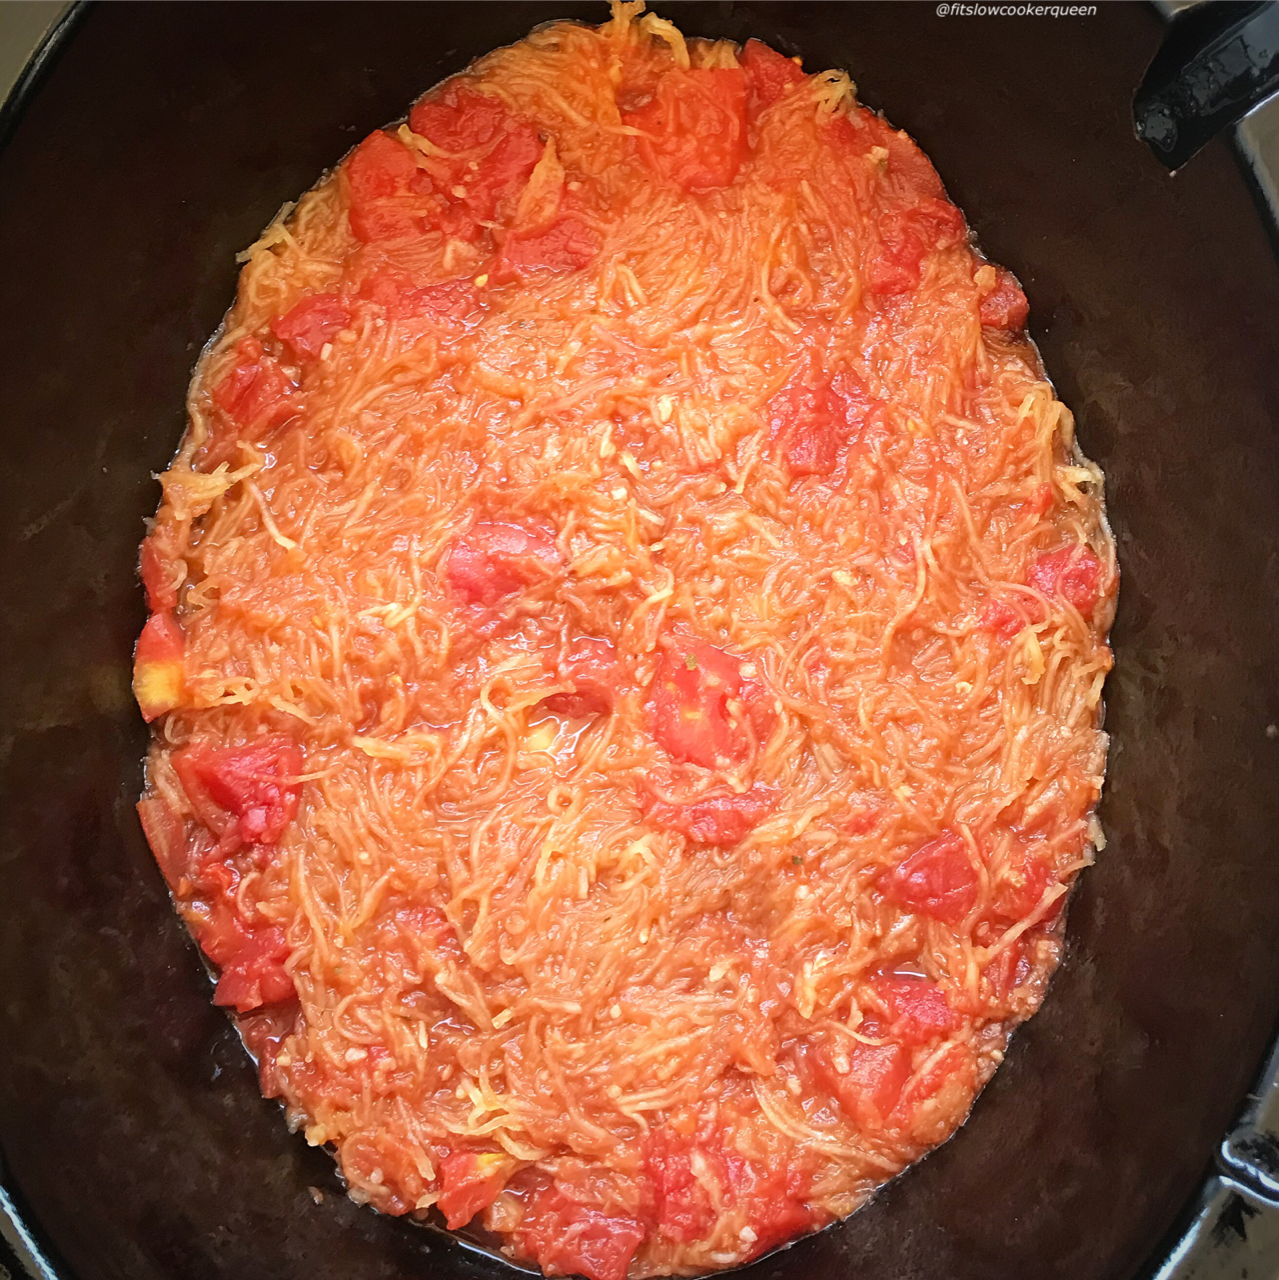 There are only a few ingredients in this slow cooker spaghetti squash casserole recipe. This healthy, low-carb alternative to spaghetti cooks in just a couple of hours time.